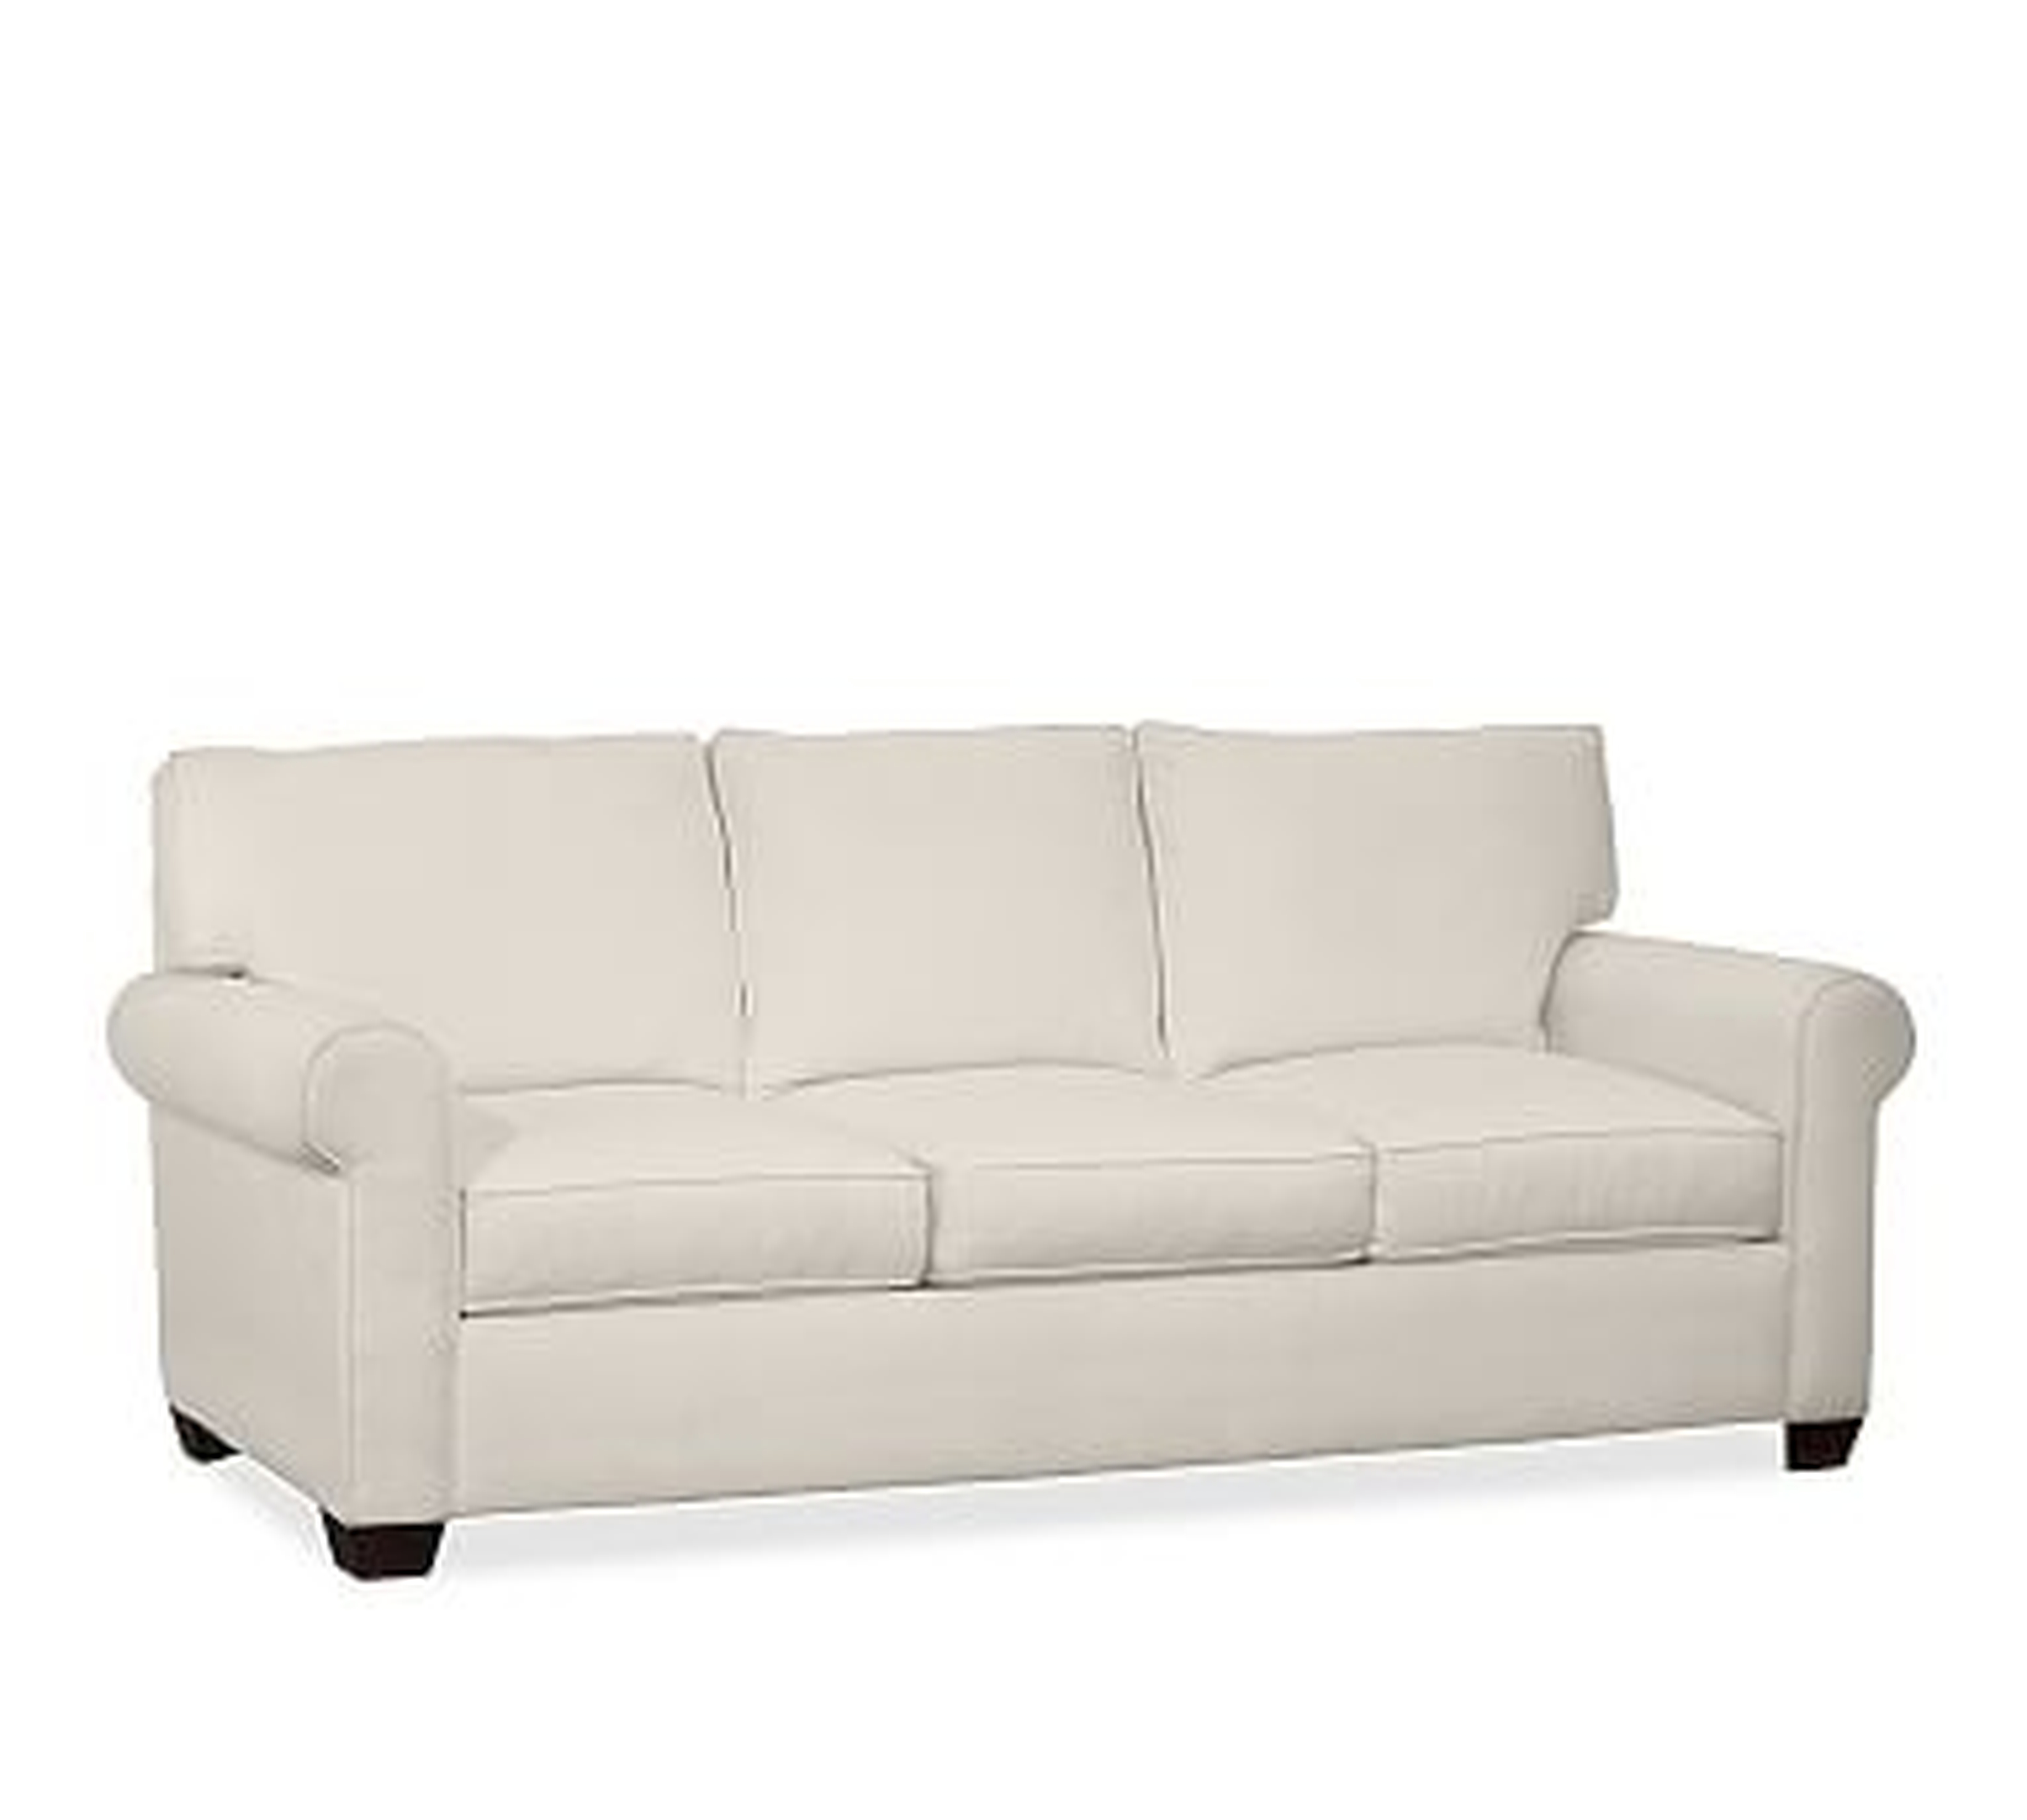 Buchanan Roll Arm Upholstered Sofa 87", Polyester Wrapped Cushions, Twill Cream - Pottery Barn